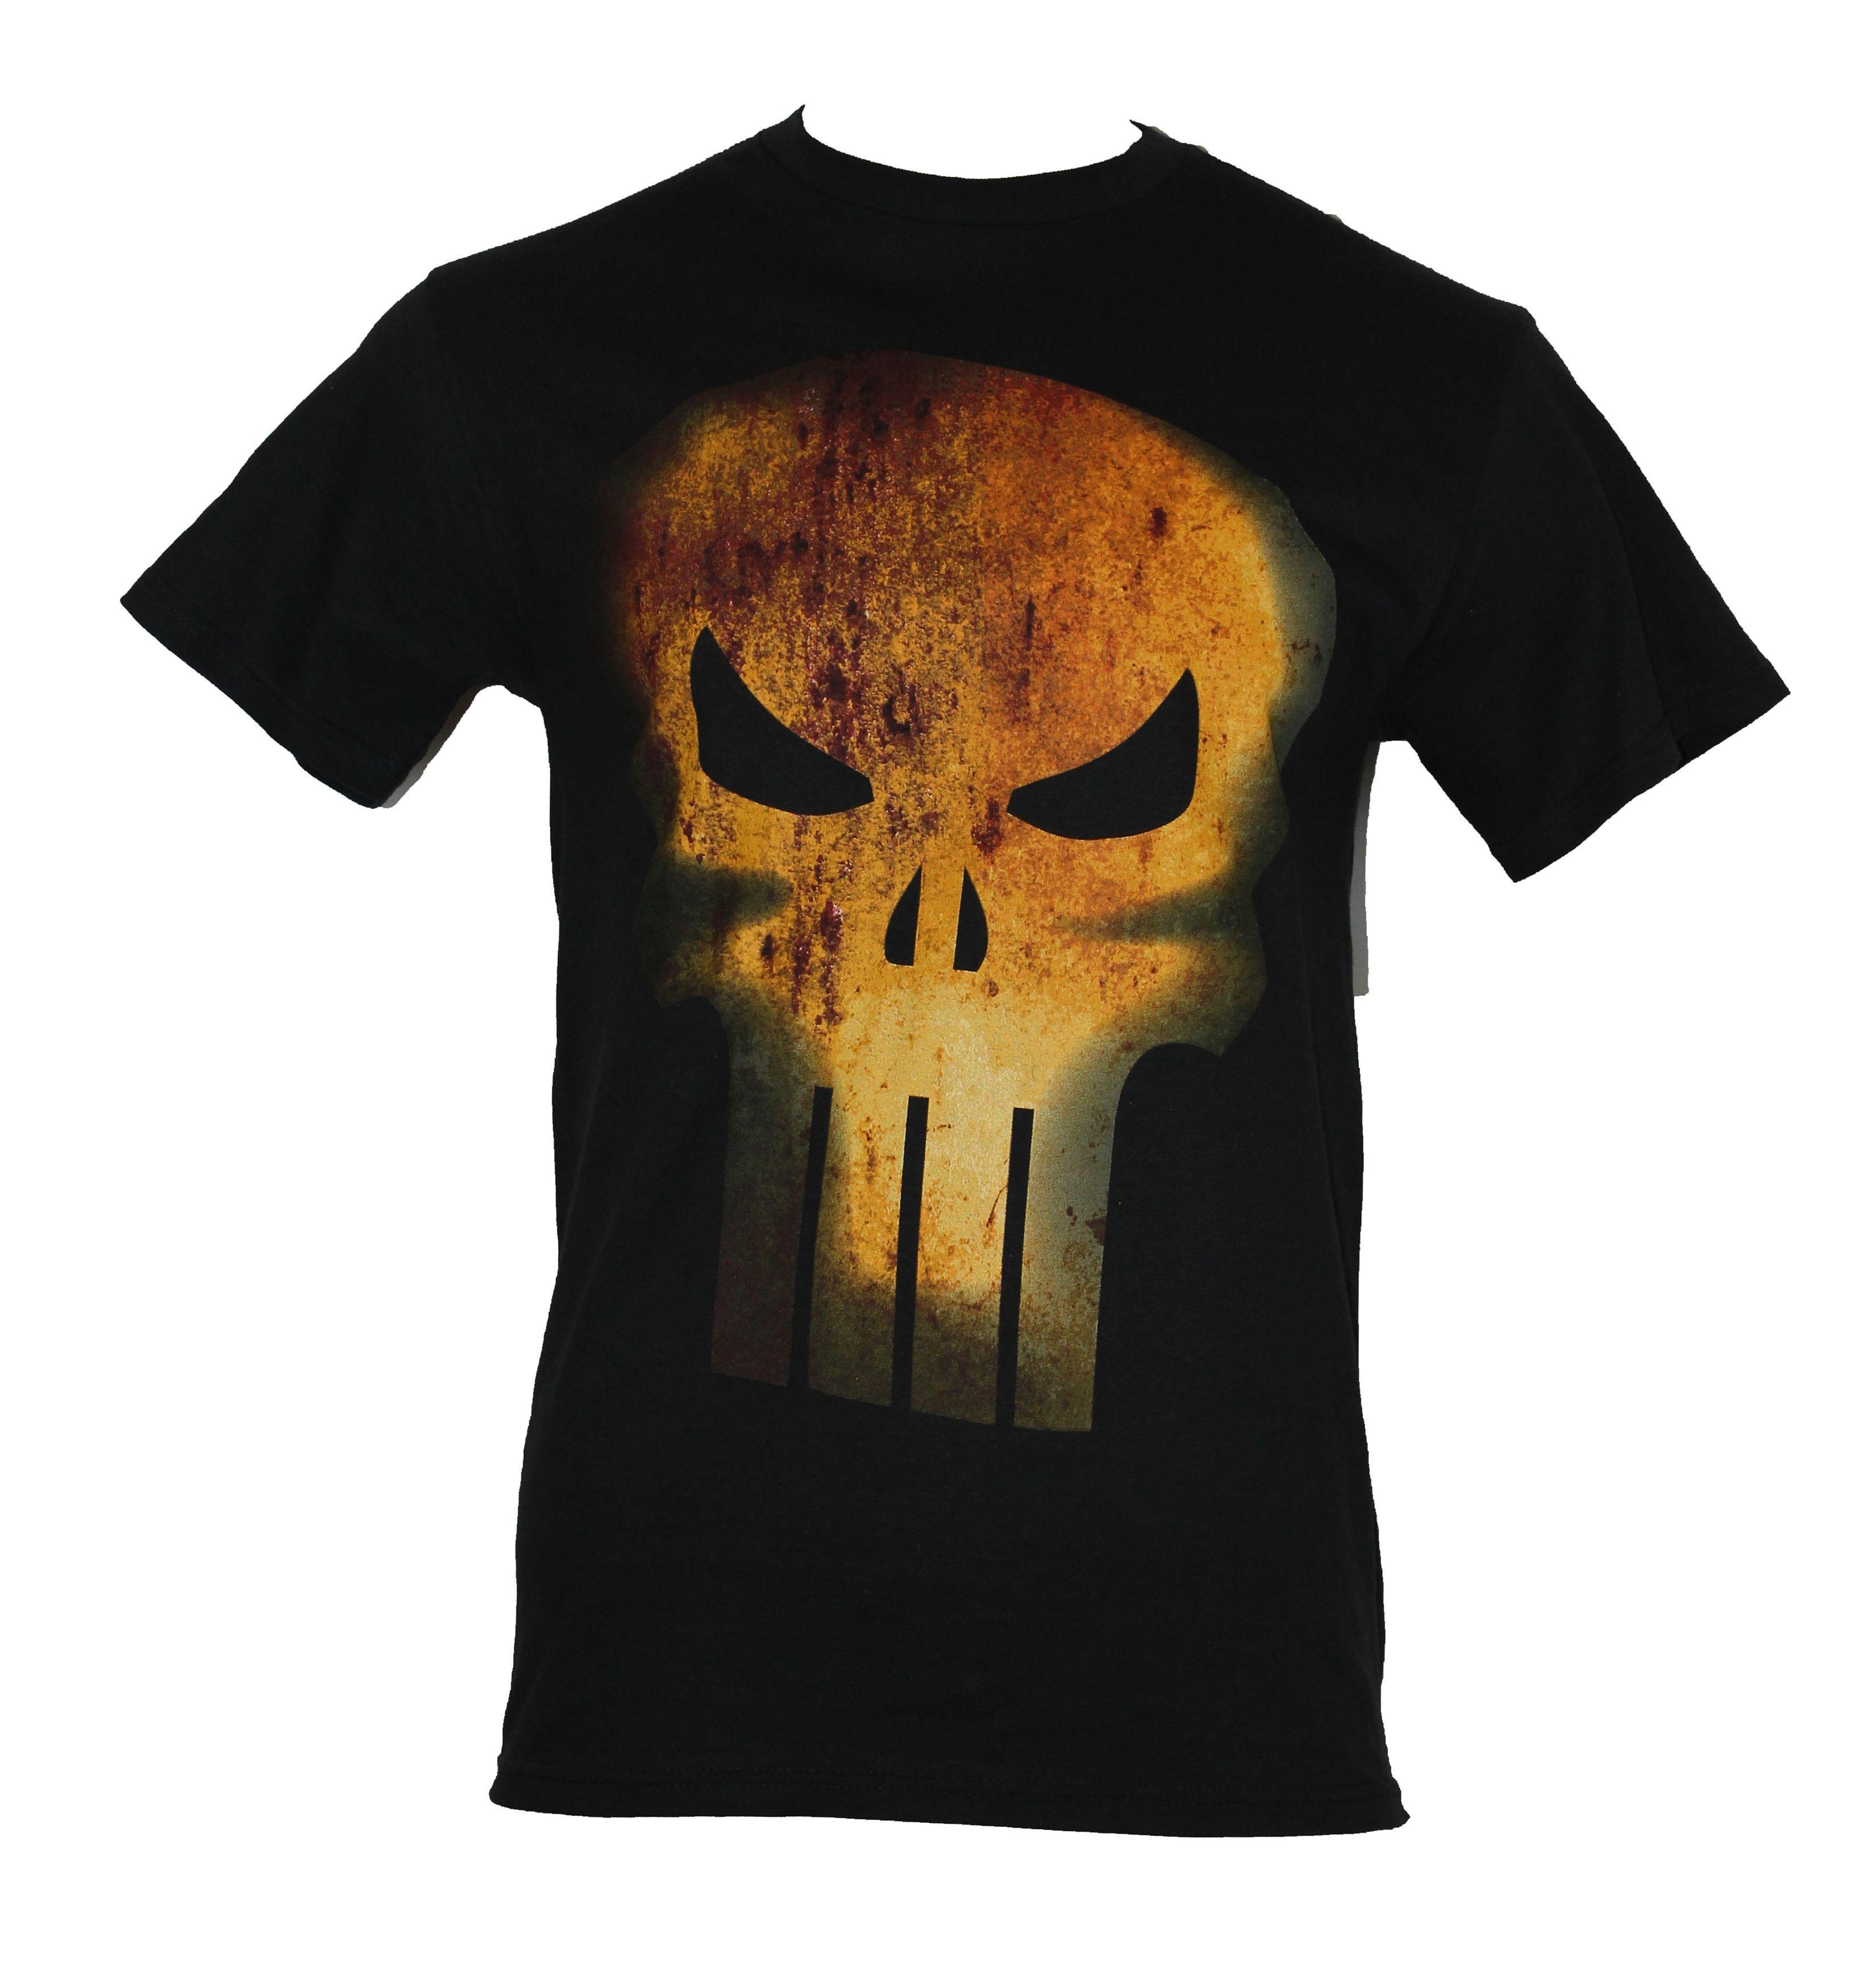 Rust Colored Logo - IMPB The Punisher (Marvel Comics) Mens T-Shirt - Giant Rust Colored ...